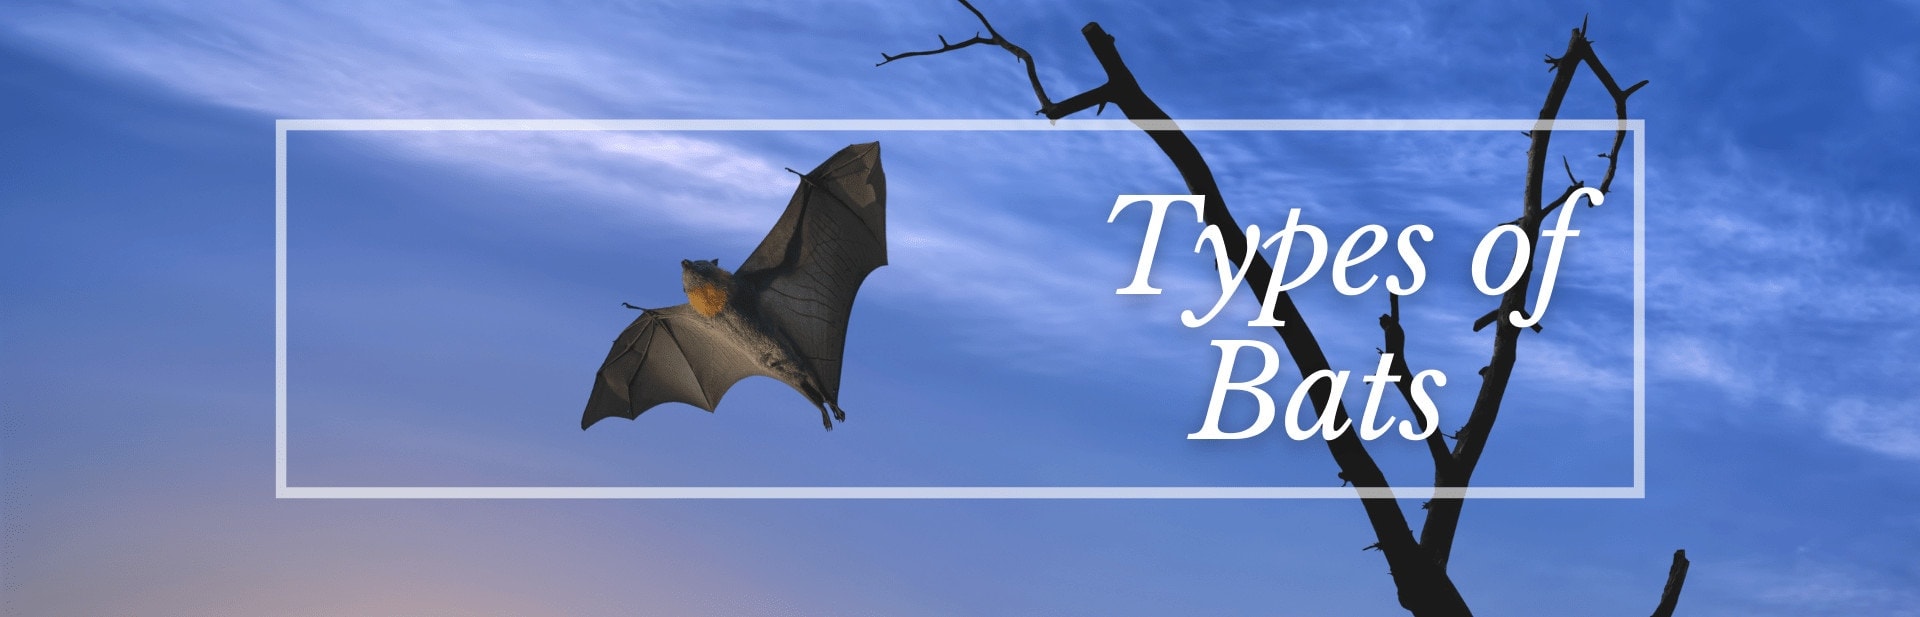 28 Types of Bats: The Cutest Bat Species (Names, Photos, and More)